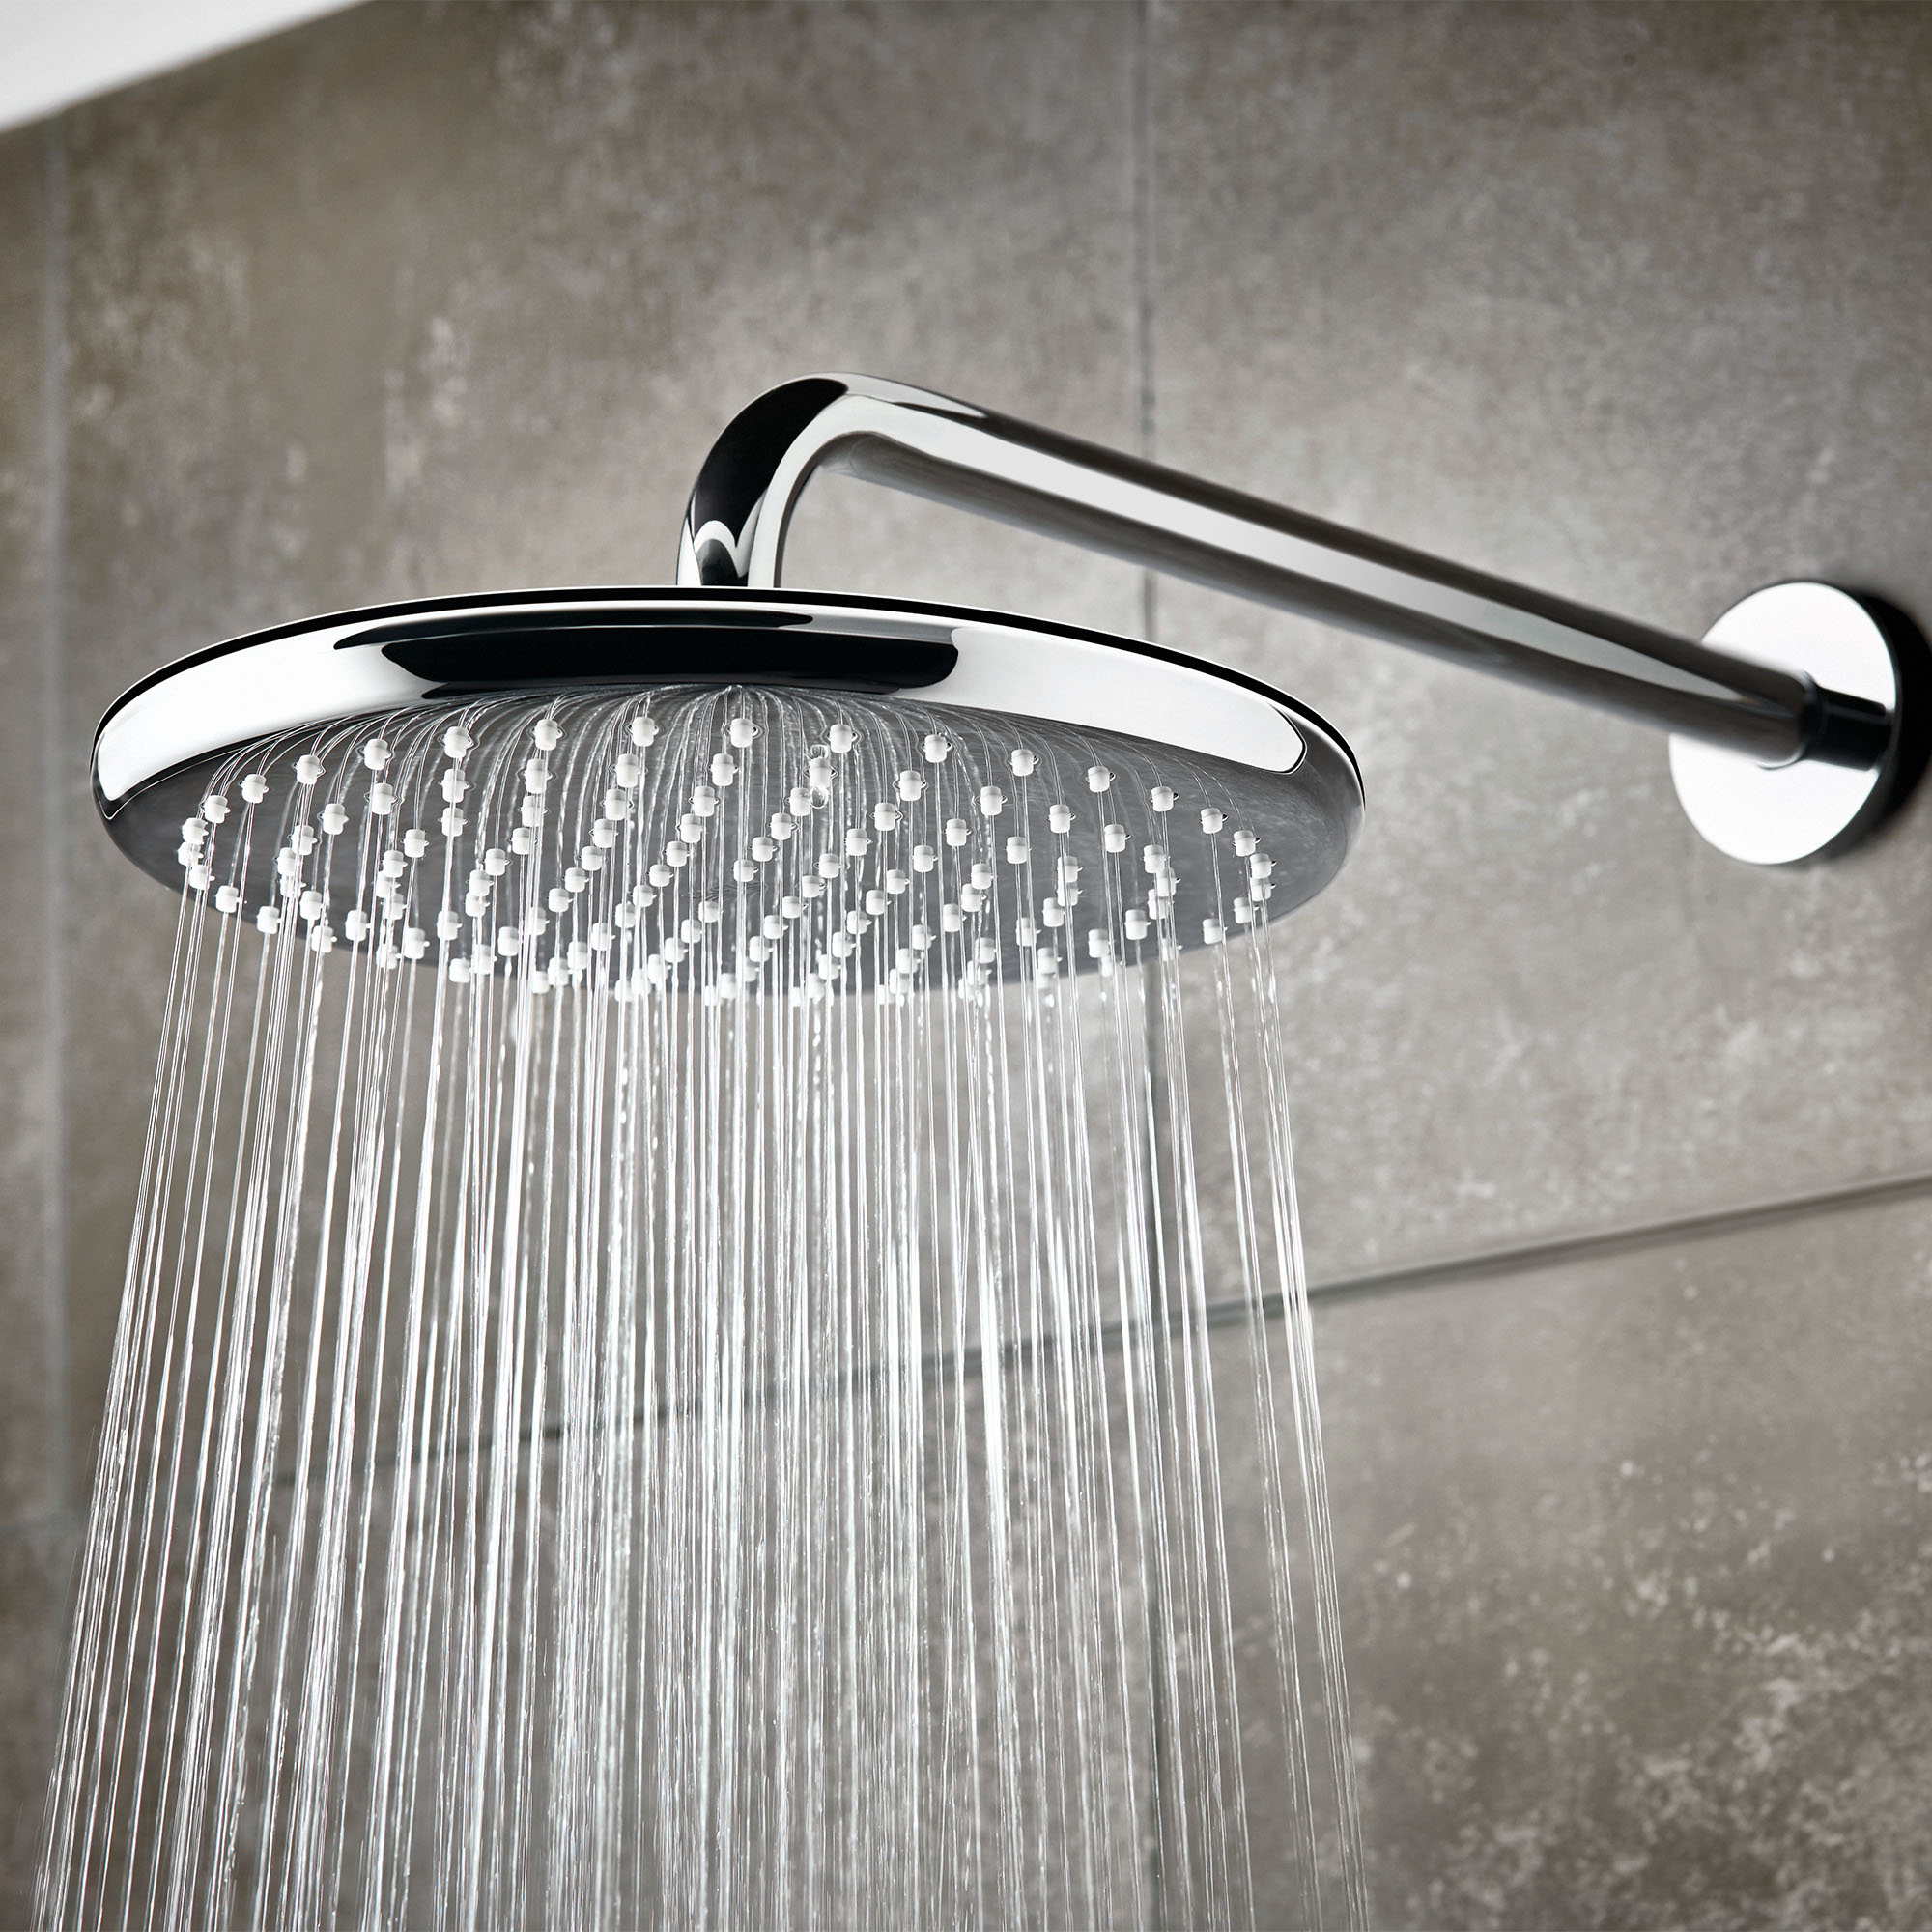 Shower Head Holder by ThreeD-Michael